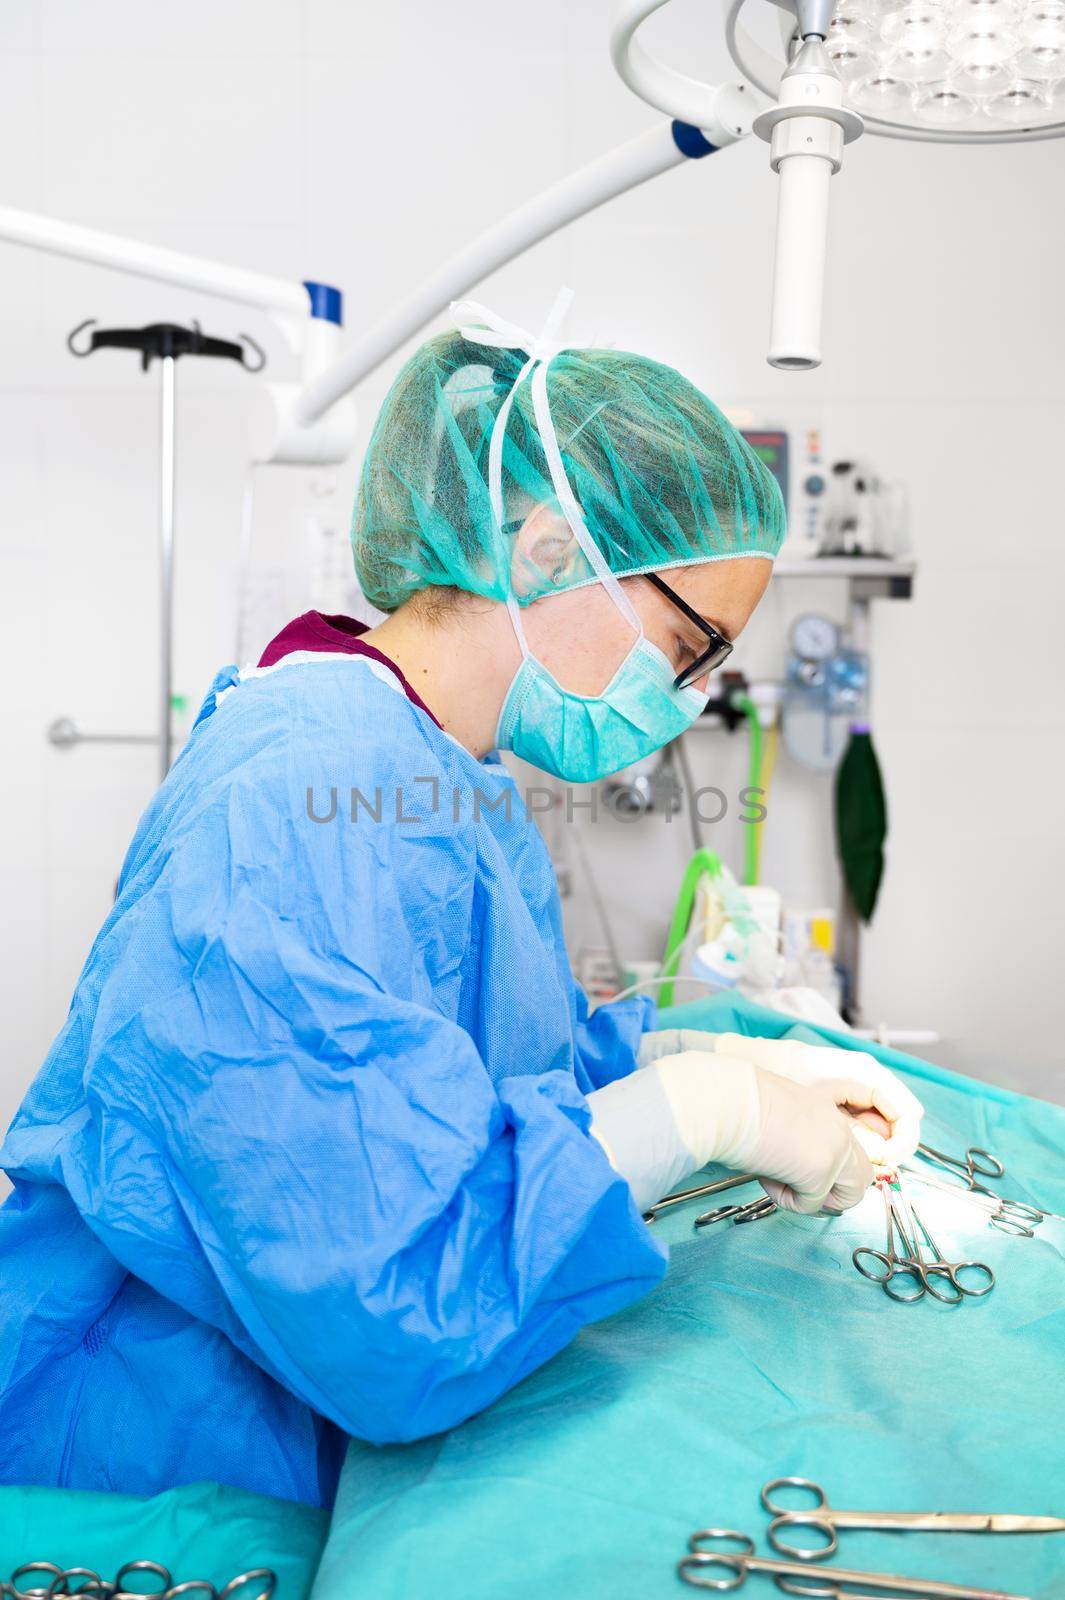 Close-up portrait of female surgeon wearing sterile clothing operating at operating room. by HERRAEZ